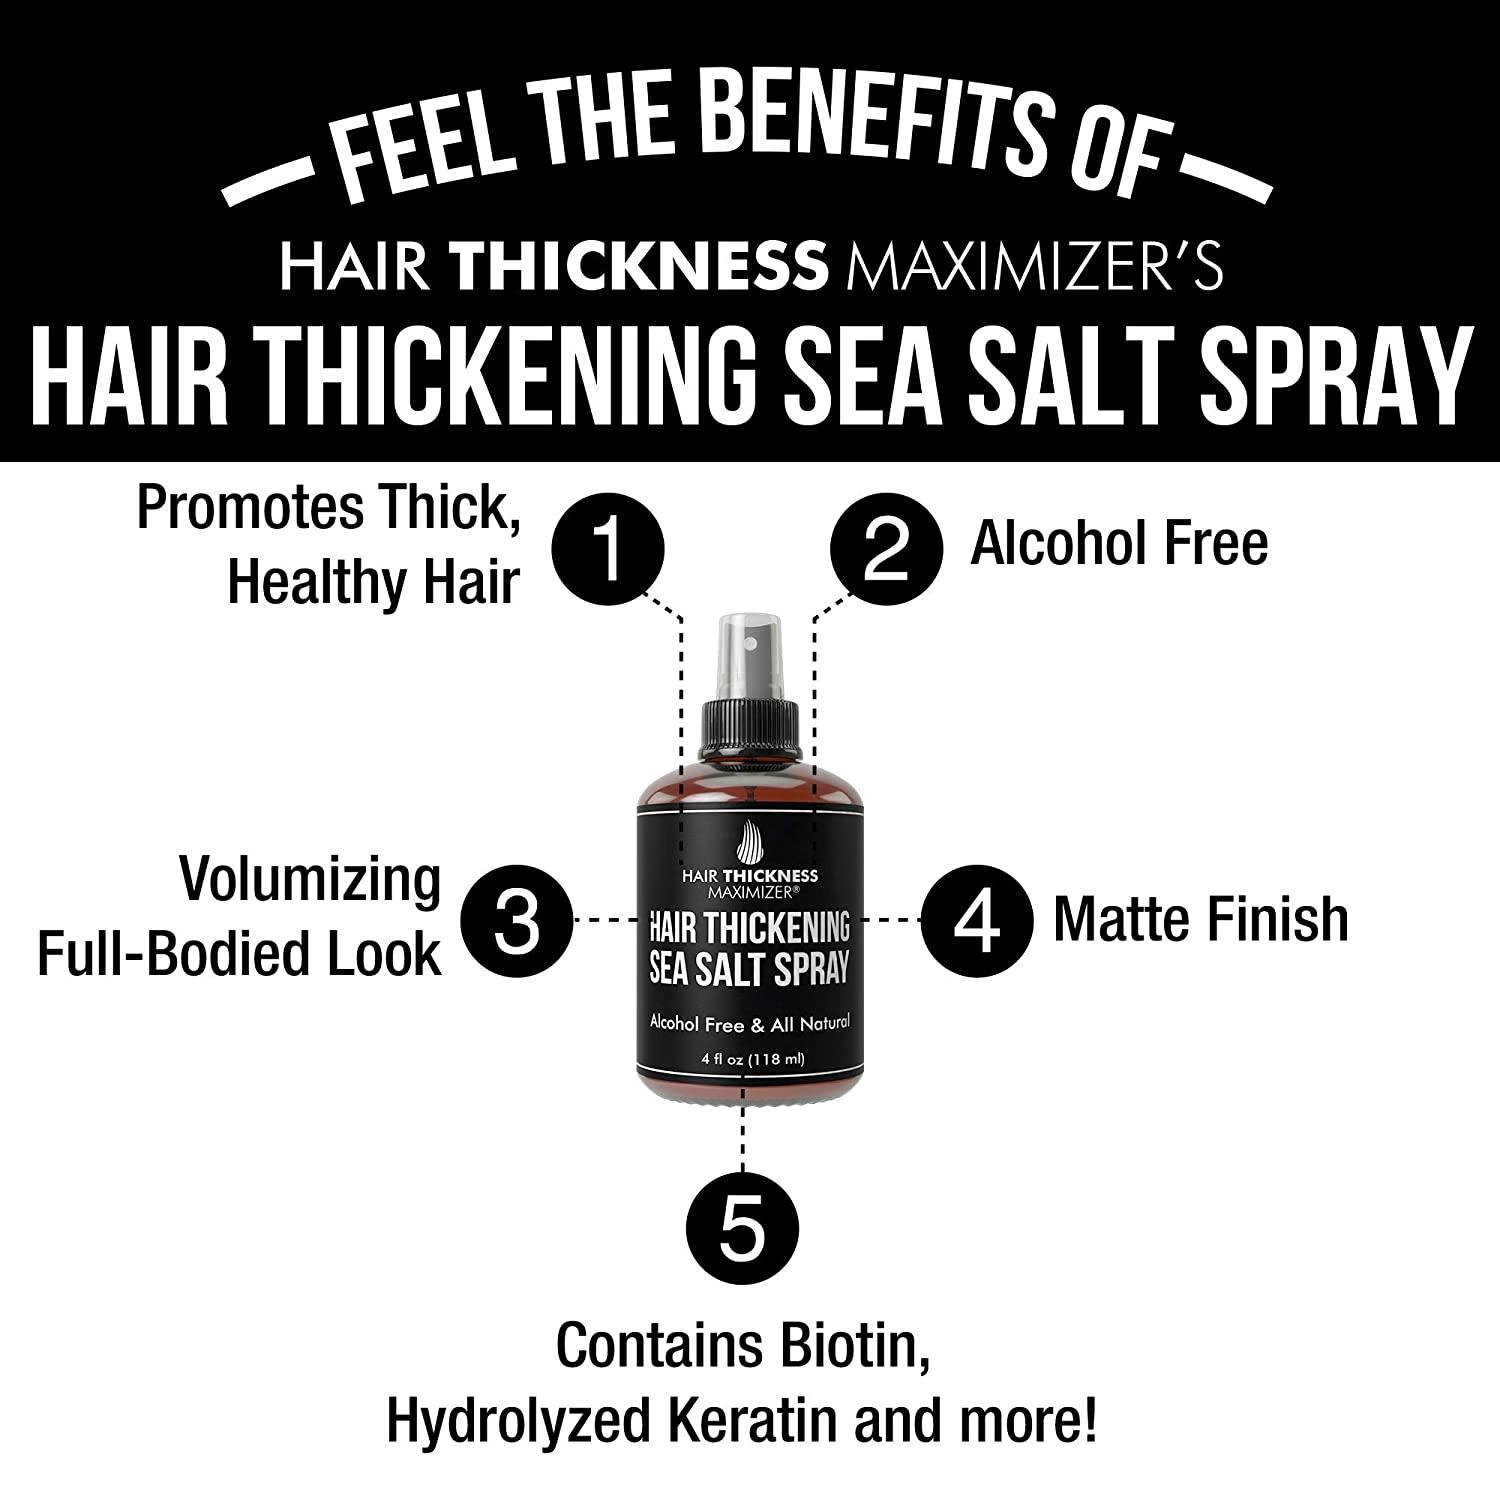 Sea Salt Spray For Hair Thickening. For Men and Women. With Biotin,  Keratin, No Alcohol. Great for Hair Growth, Beard. Volumizer + Texture.  Stop Hair Loss and Thinning. Sea Salt Water Hair